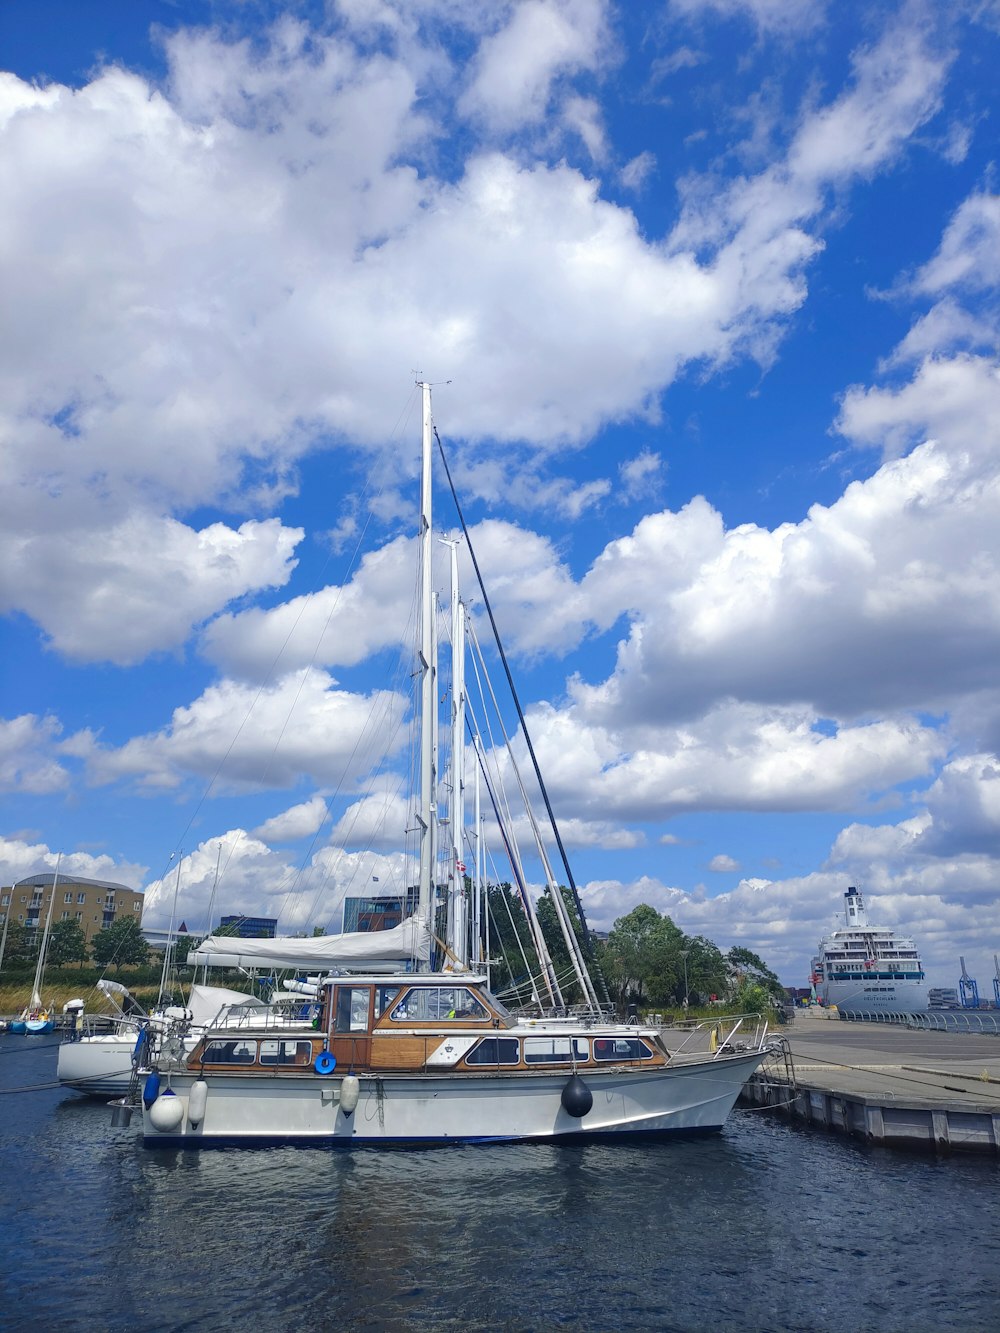 a sailboat docked at a dock in a harbor